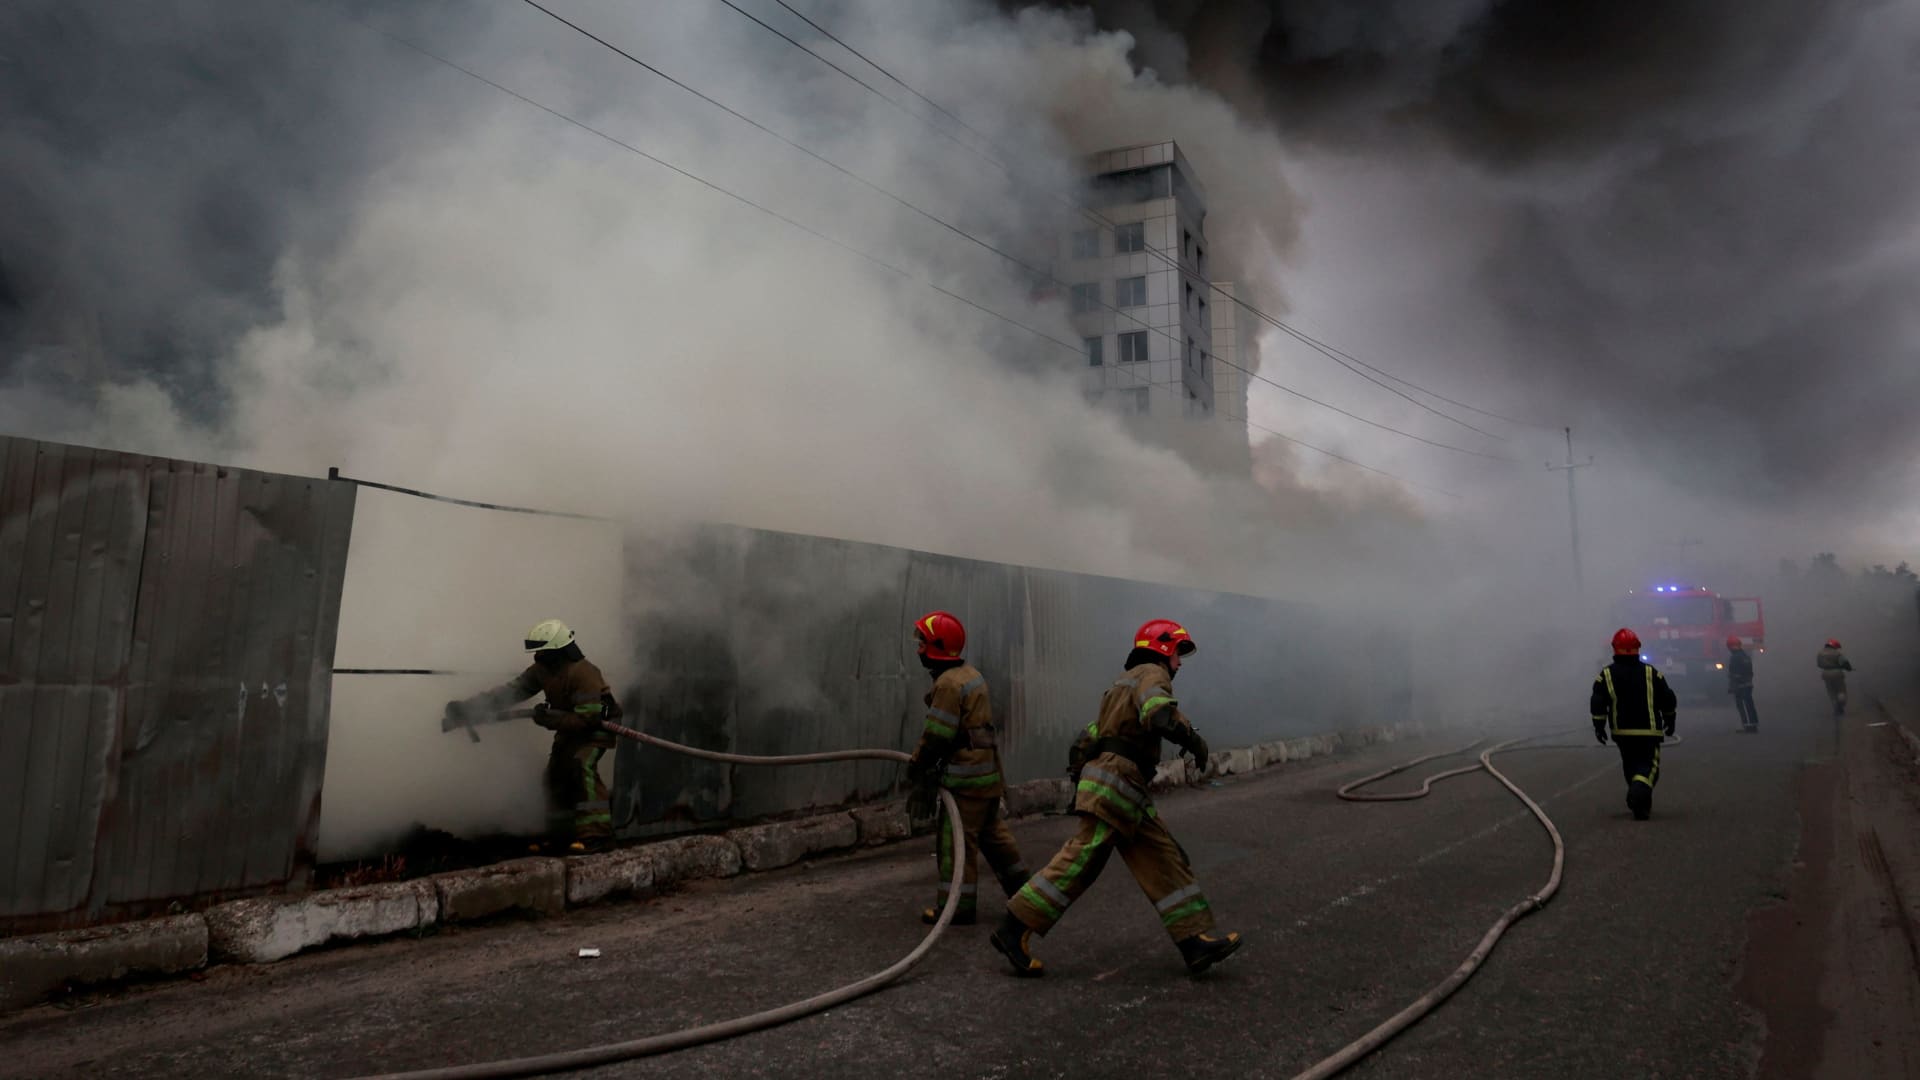 Firefighters extinguish fire at a warehouse that caught flames, according to local authorities, after shelling, as Russia's invasion of Ukraine continues, in the village of Chaiky in the Kyiv region, Ukraine March 3, 2022.